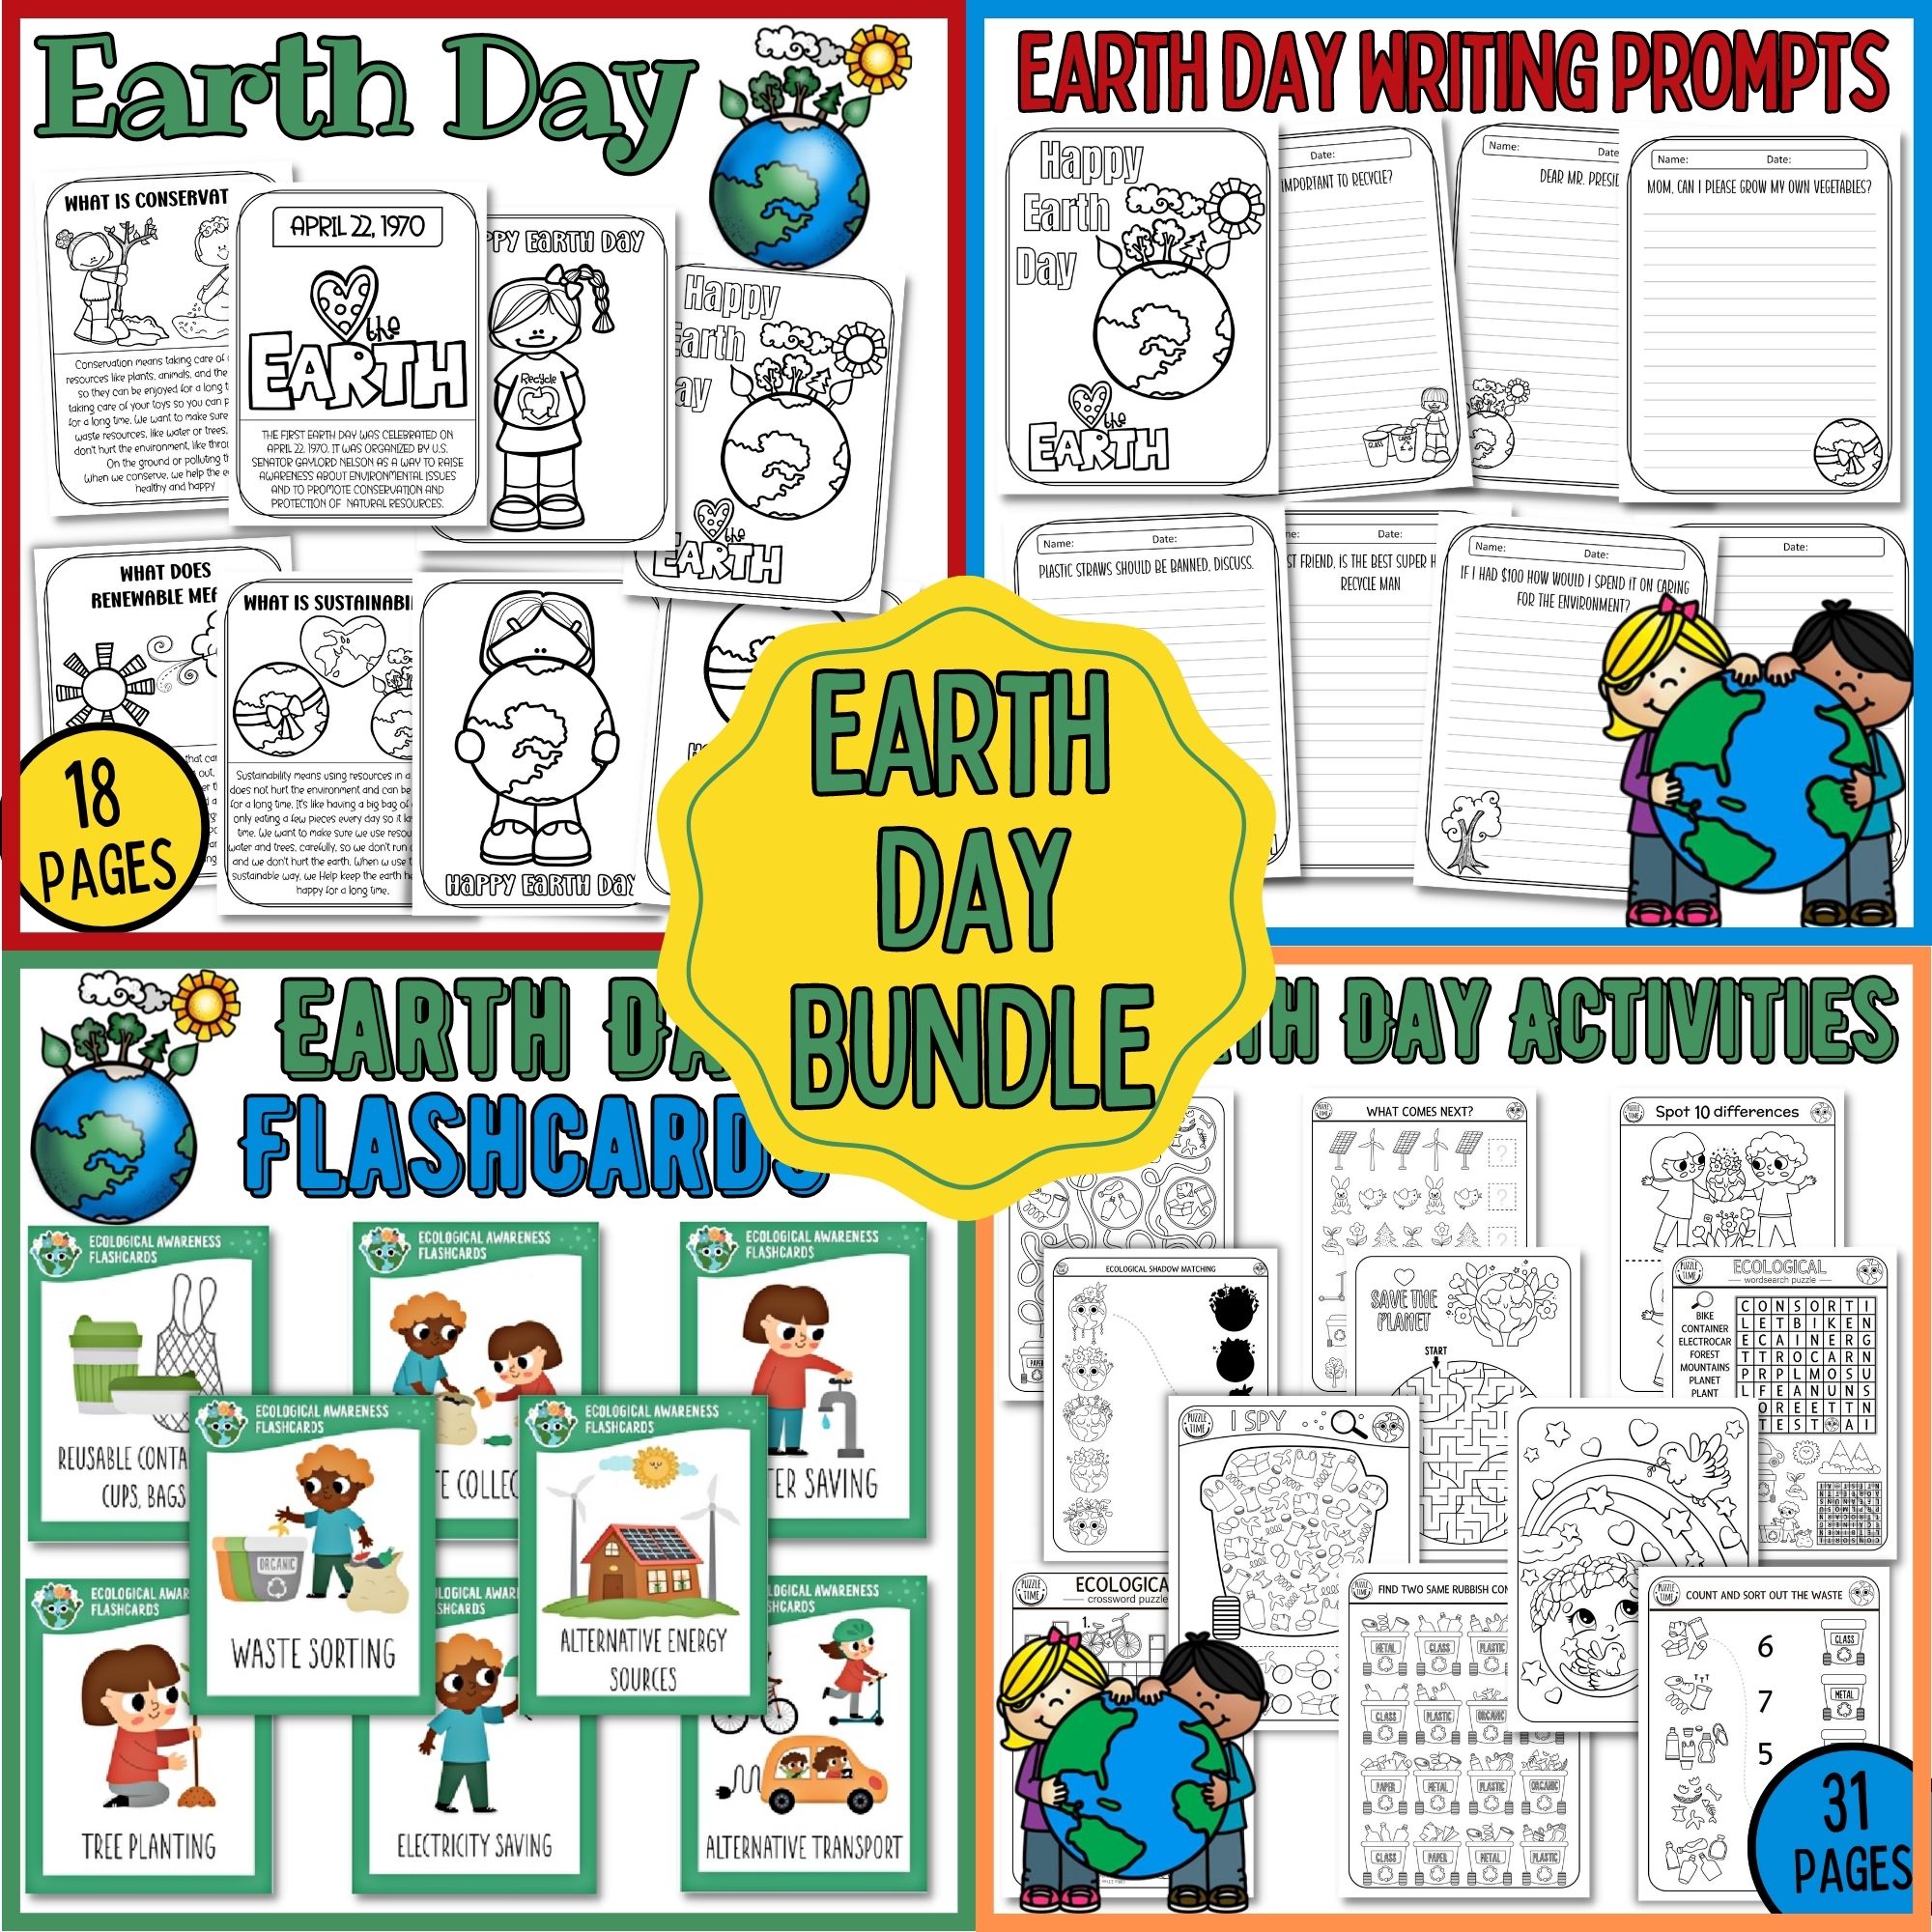 Earth day bundle flashcards coloring pages puzzles mazes and more made by teachers